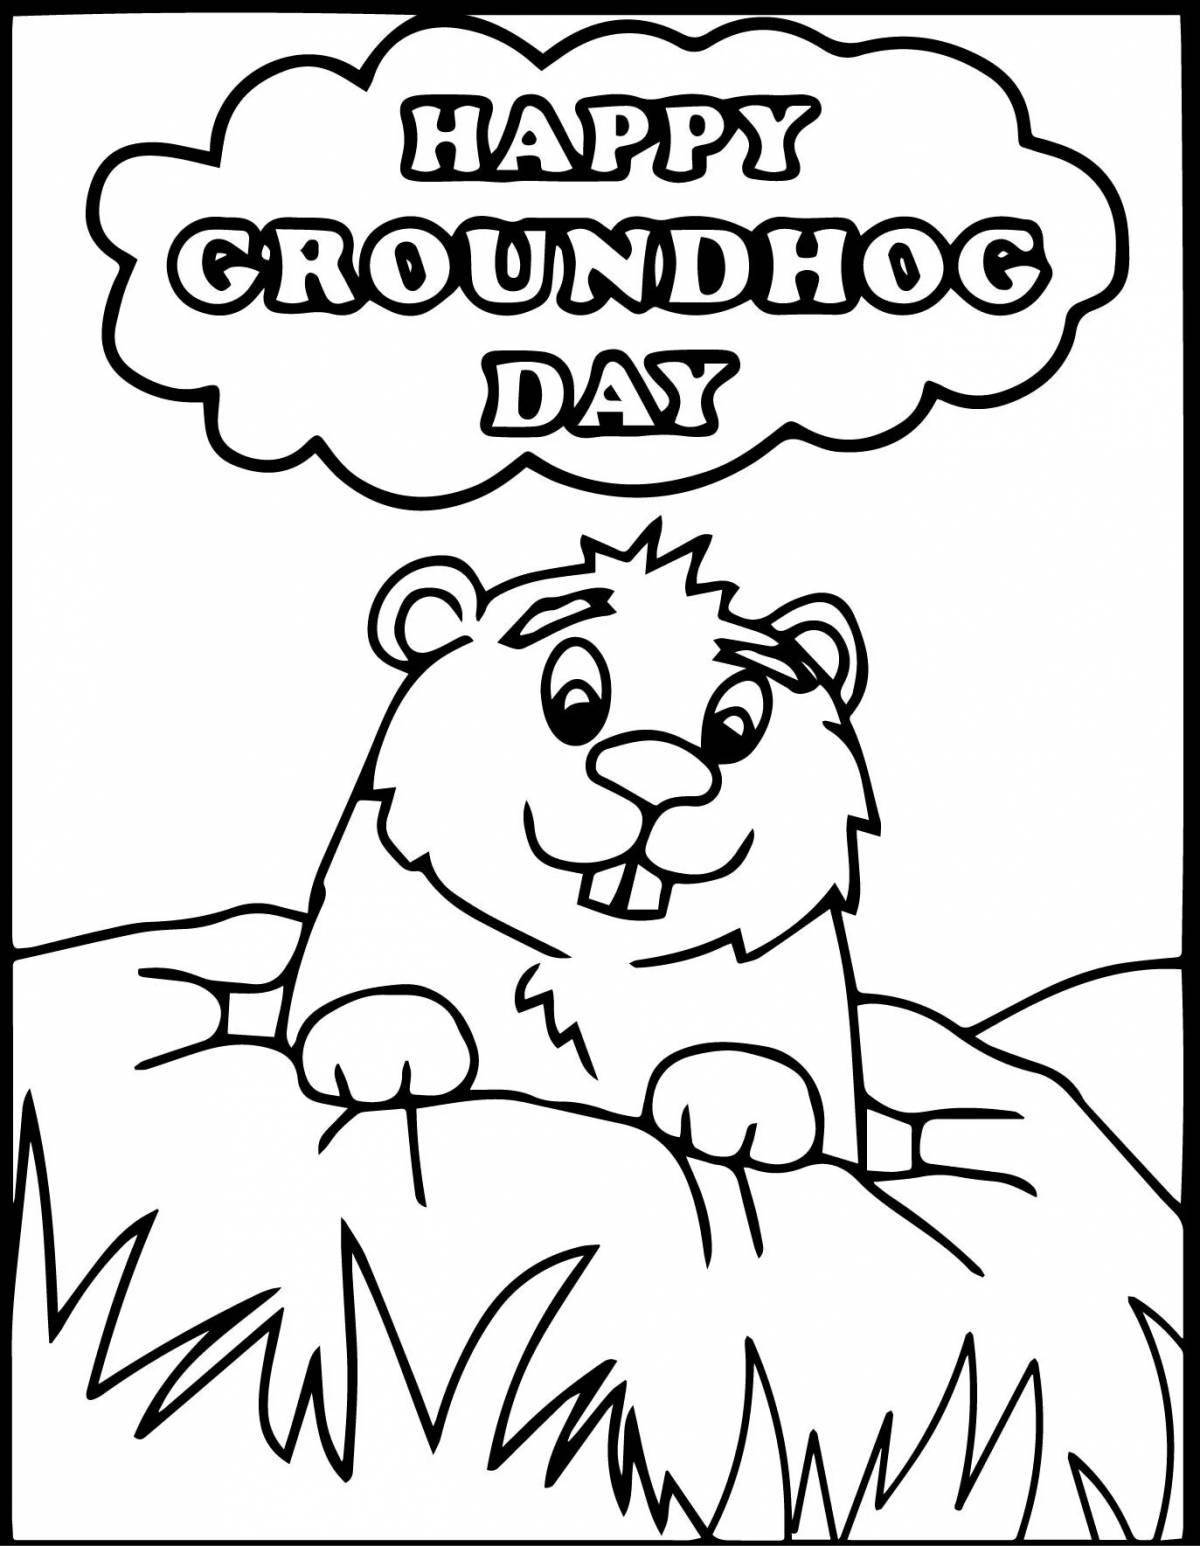 Great groundhog day coloring book